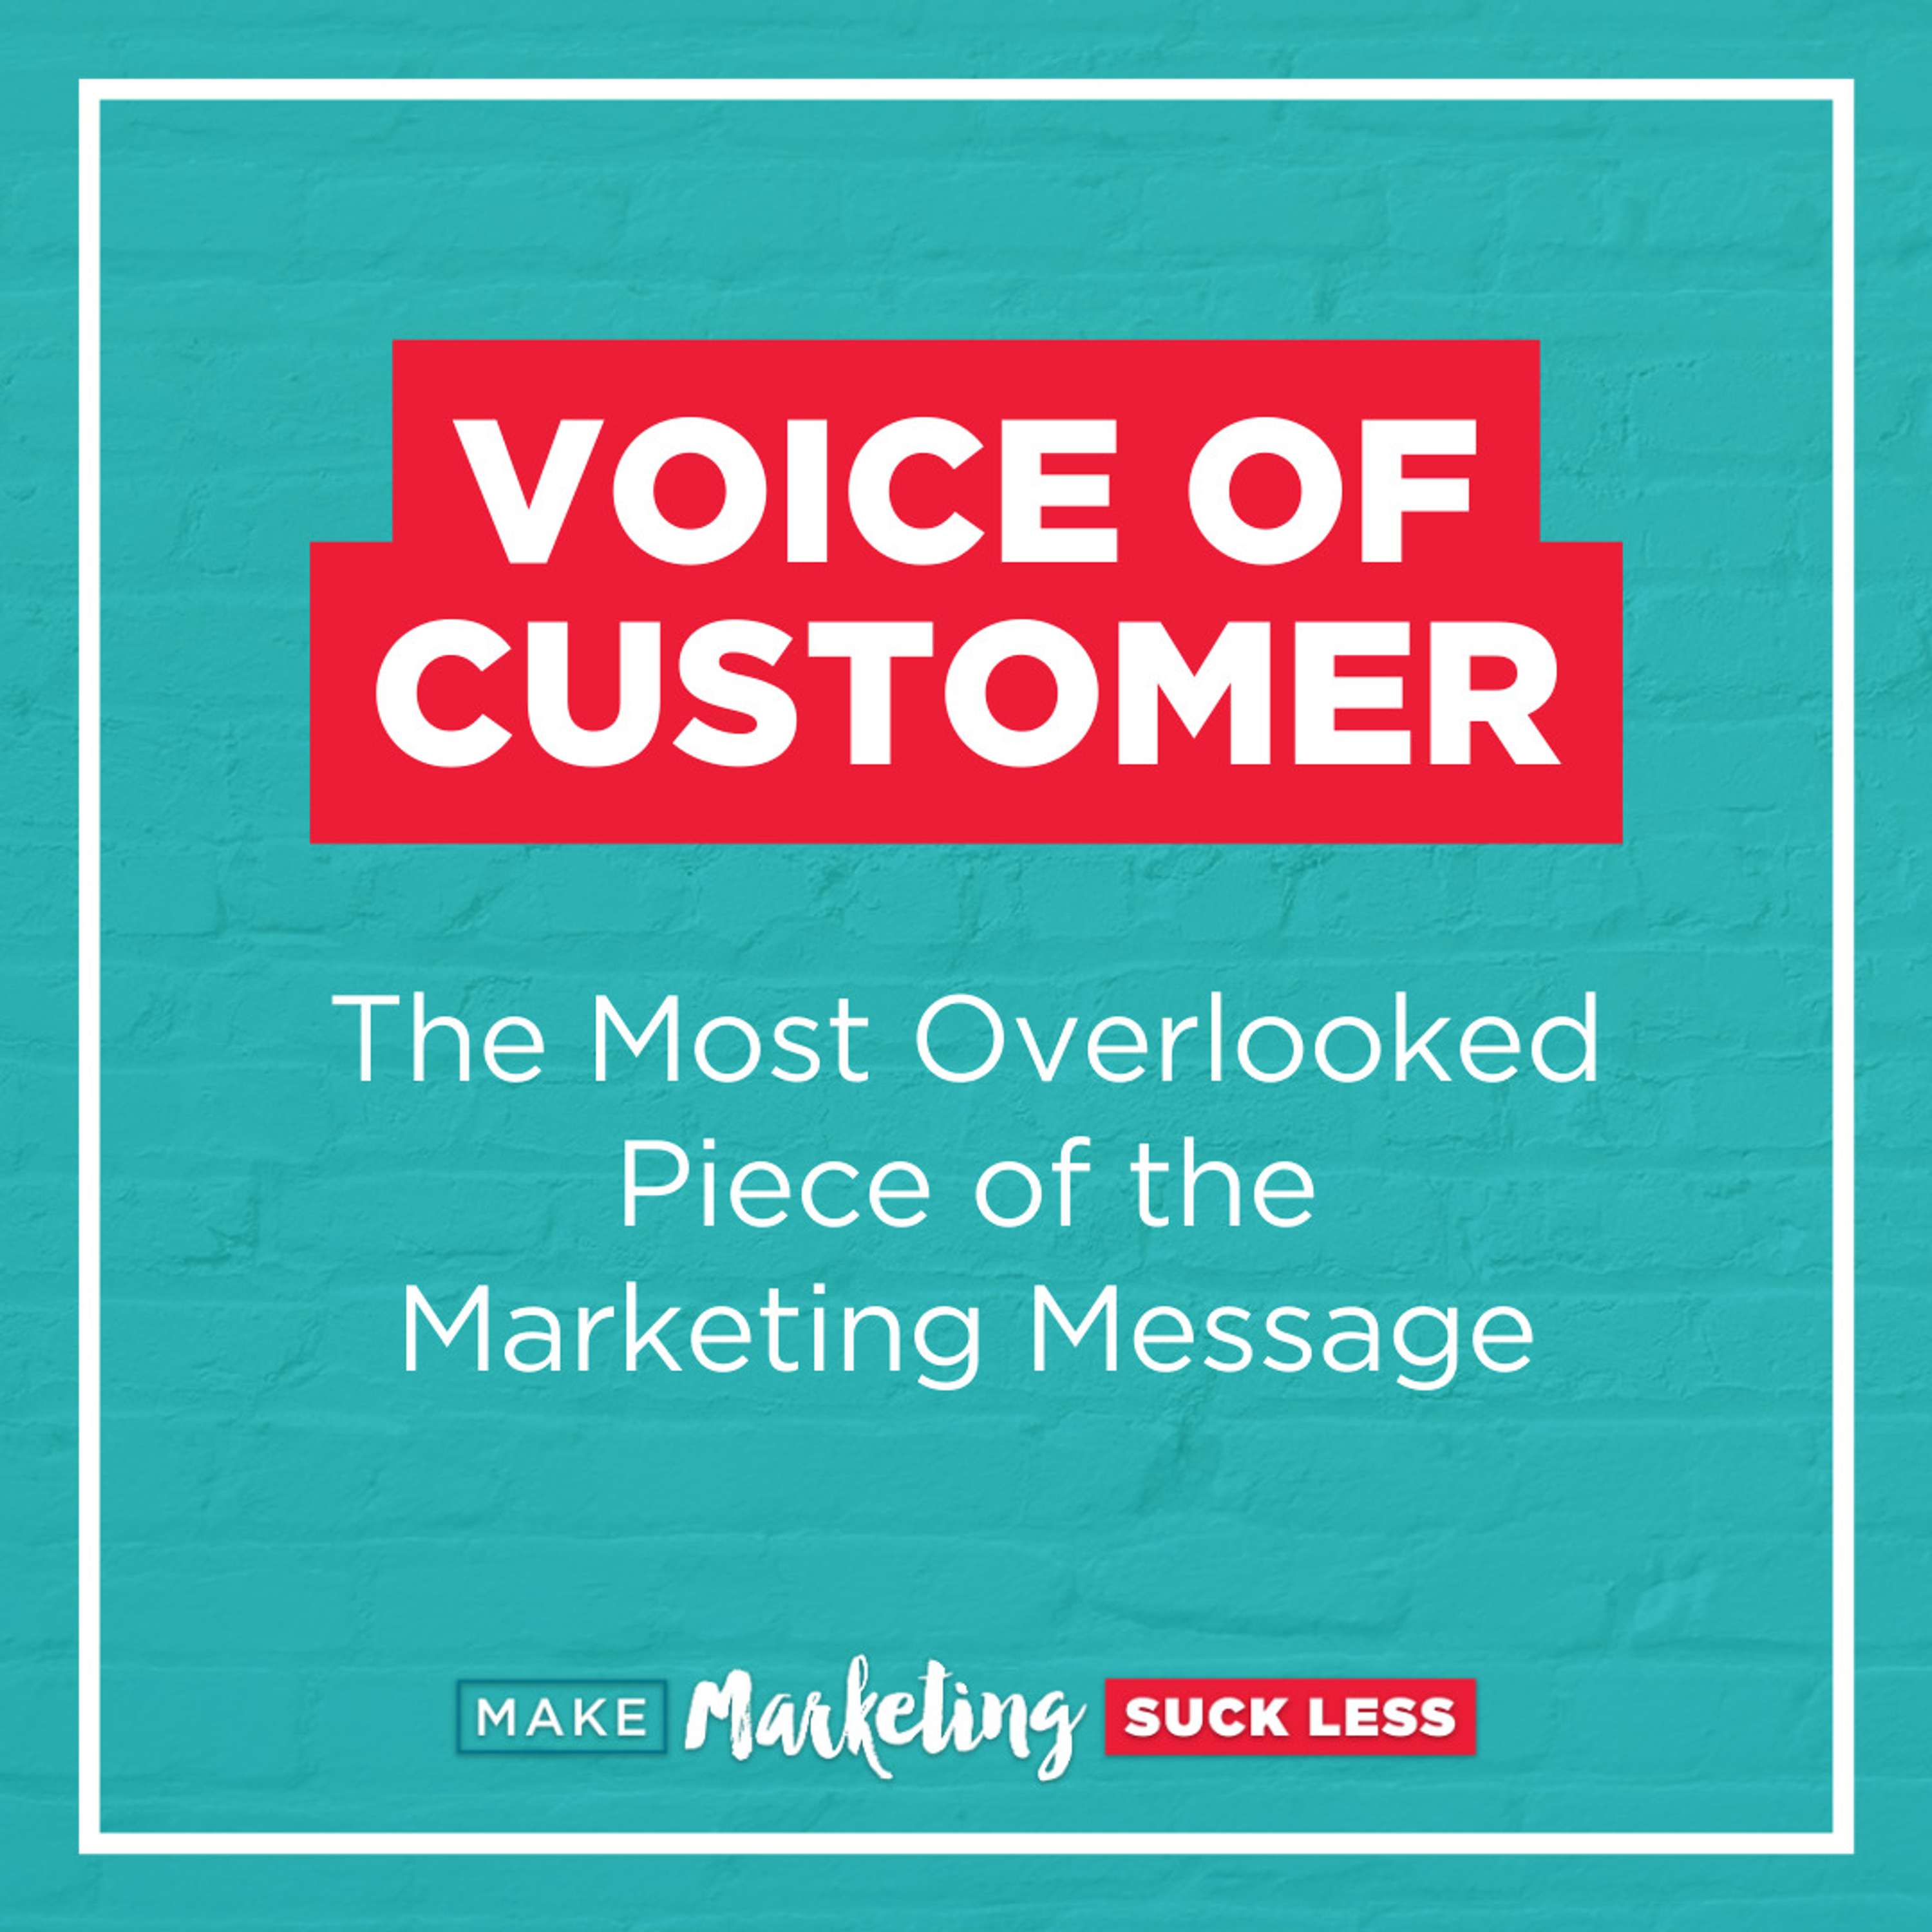 Voice of Customer: The Most Overlooked Piece of the Marketing Message